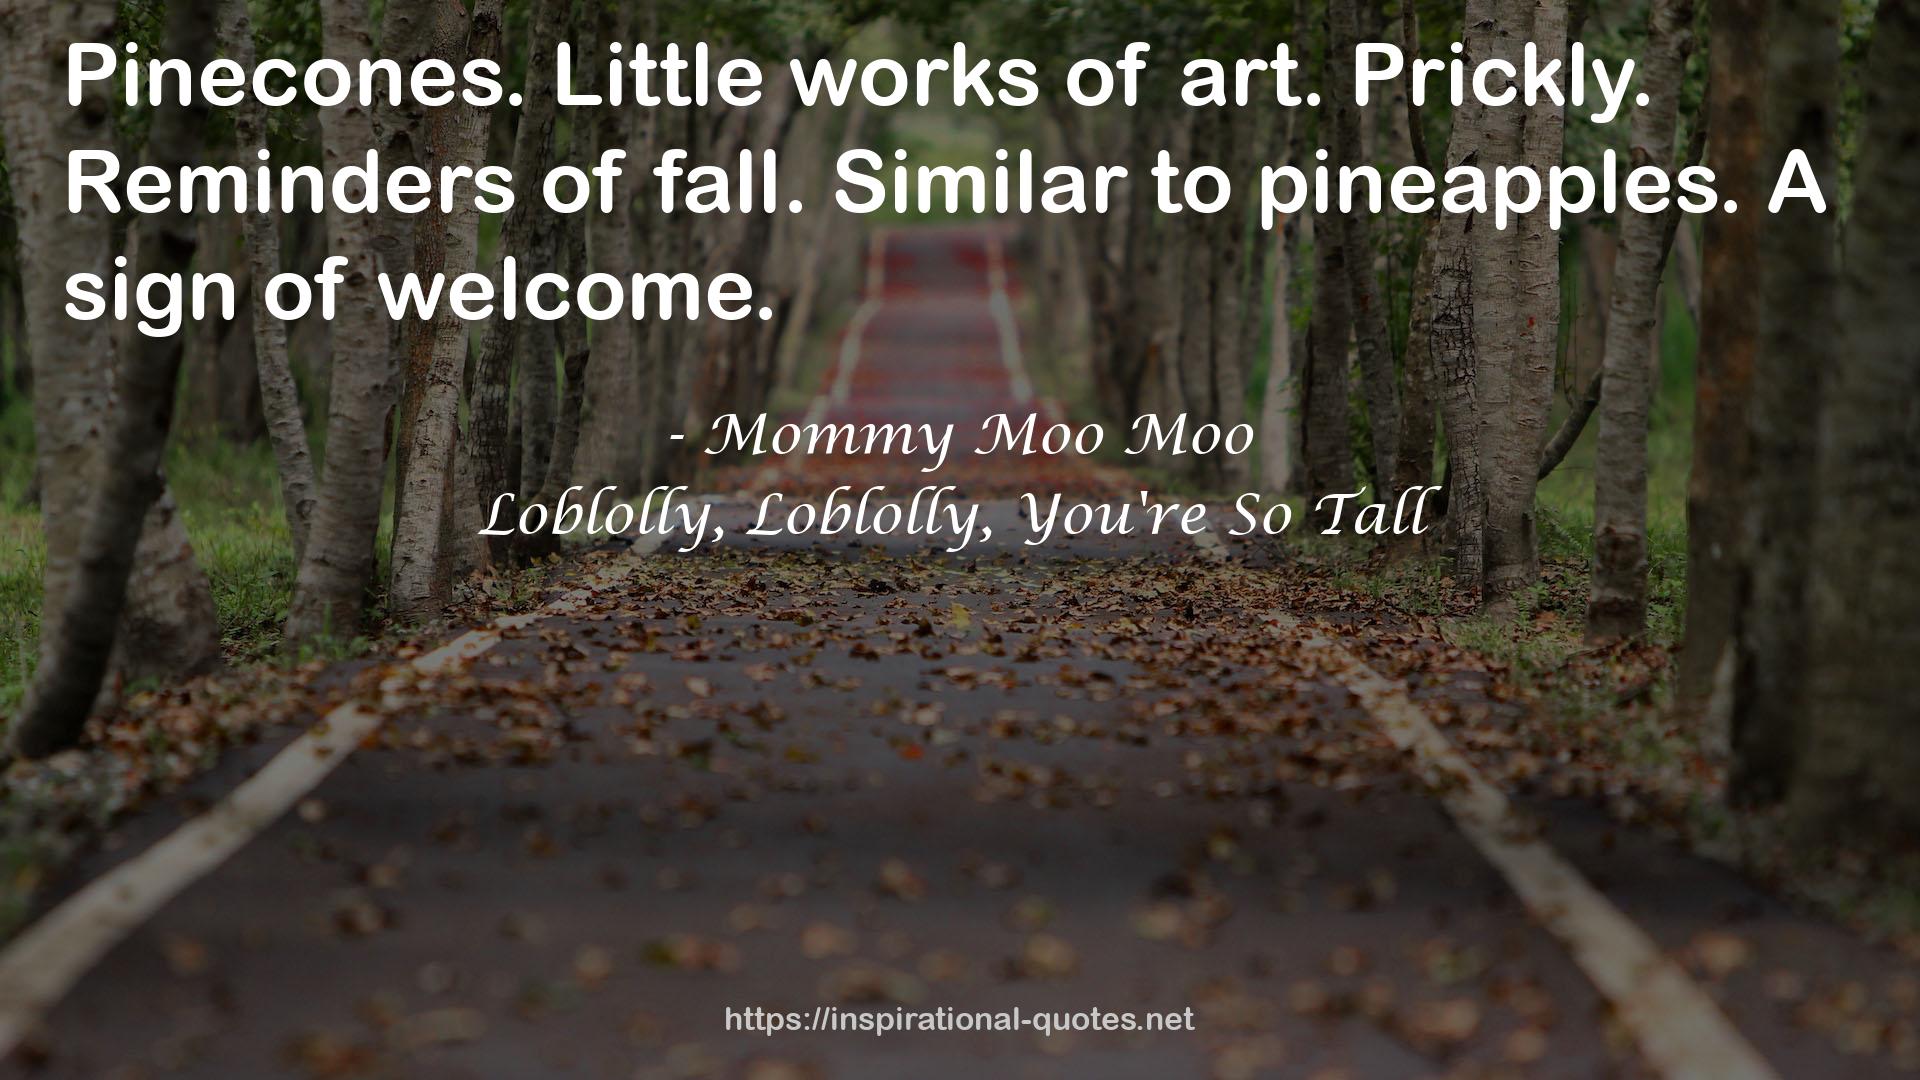 Loblolly, Loblolly, You're So Tall QUOTES